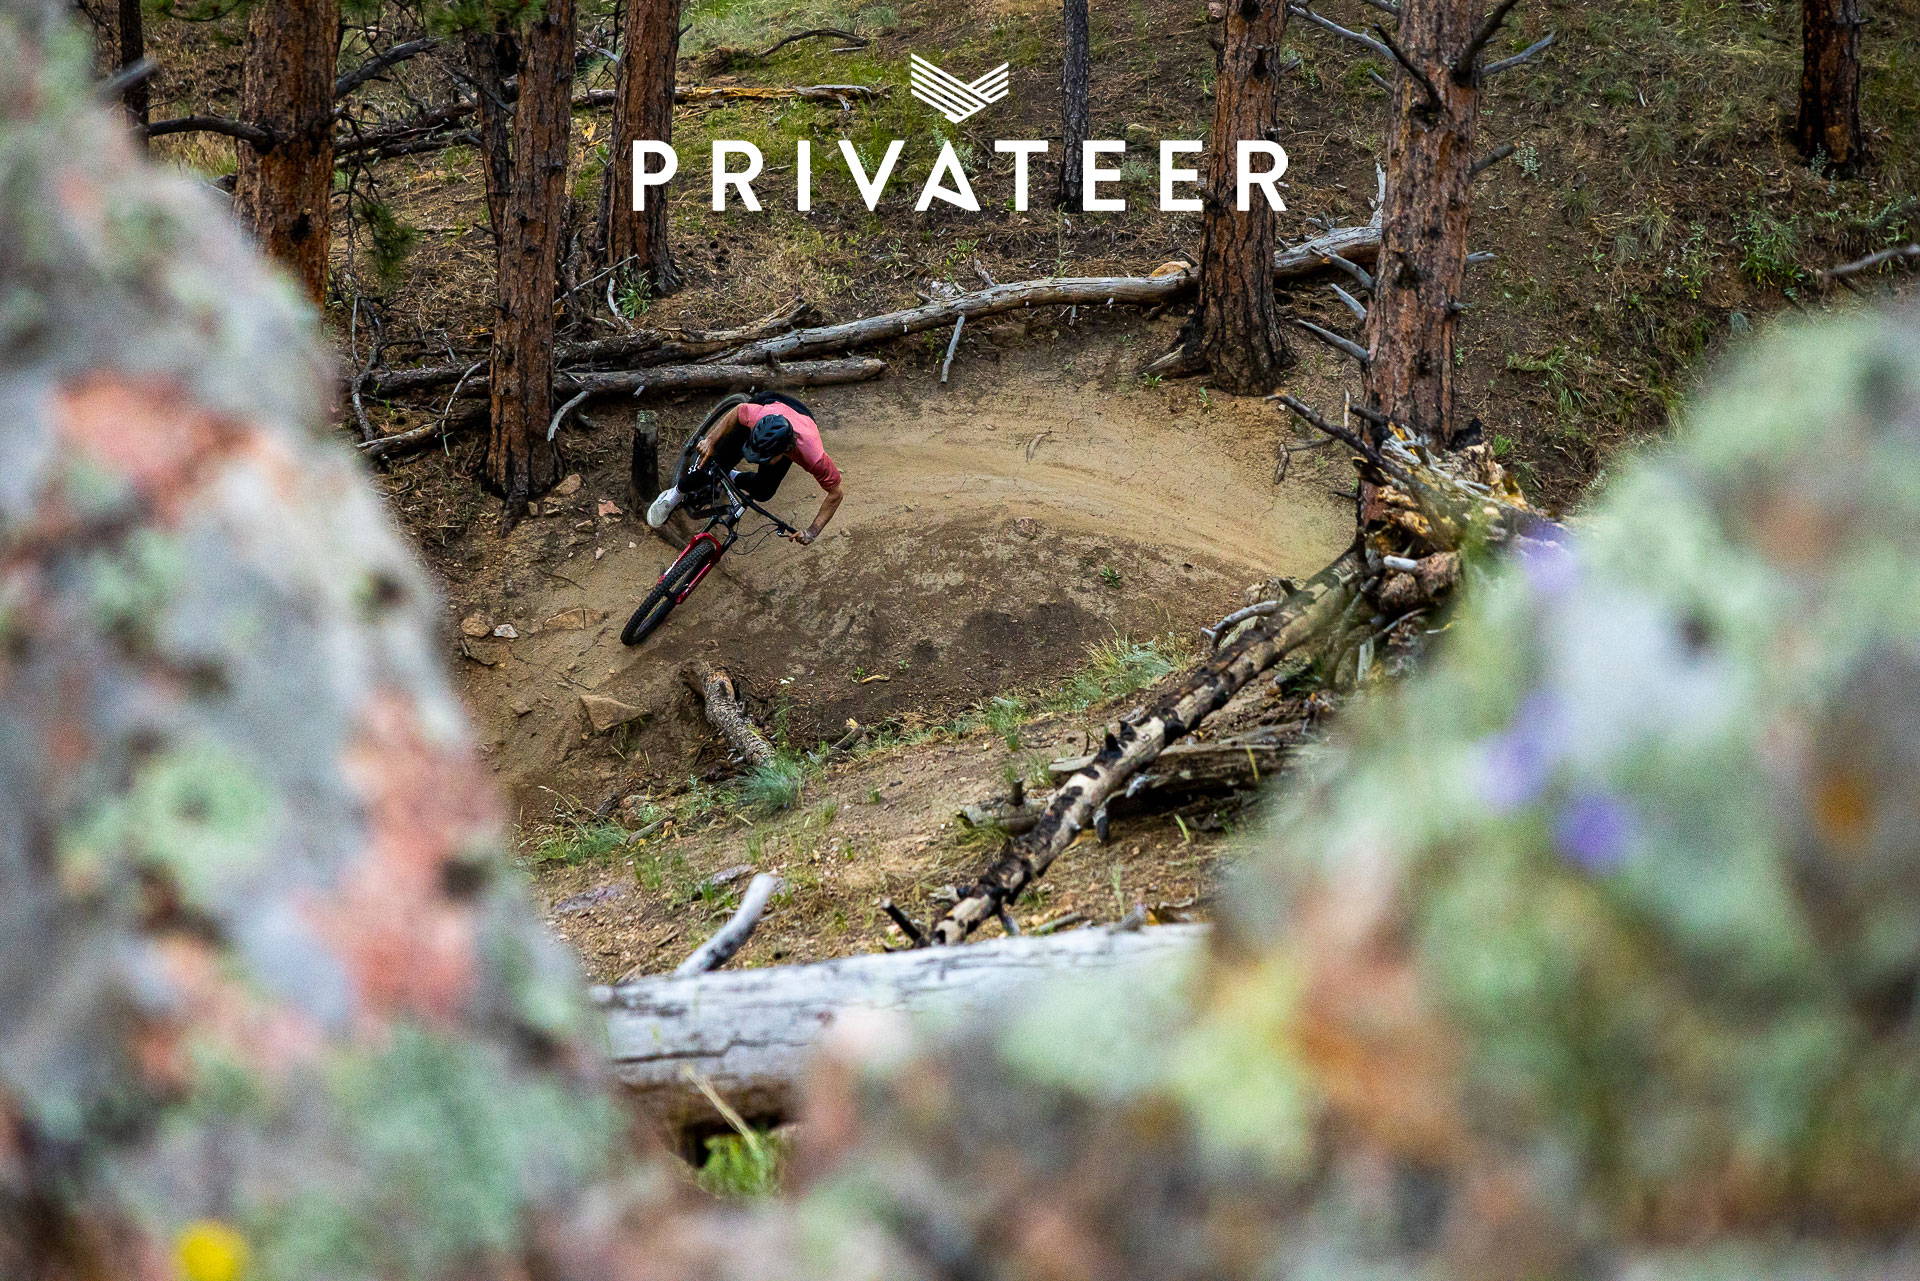 Dom Knight riding a berm with a Privateer Bikes logo